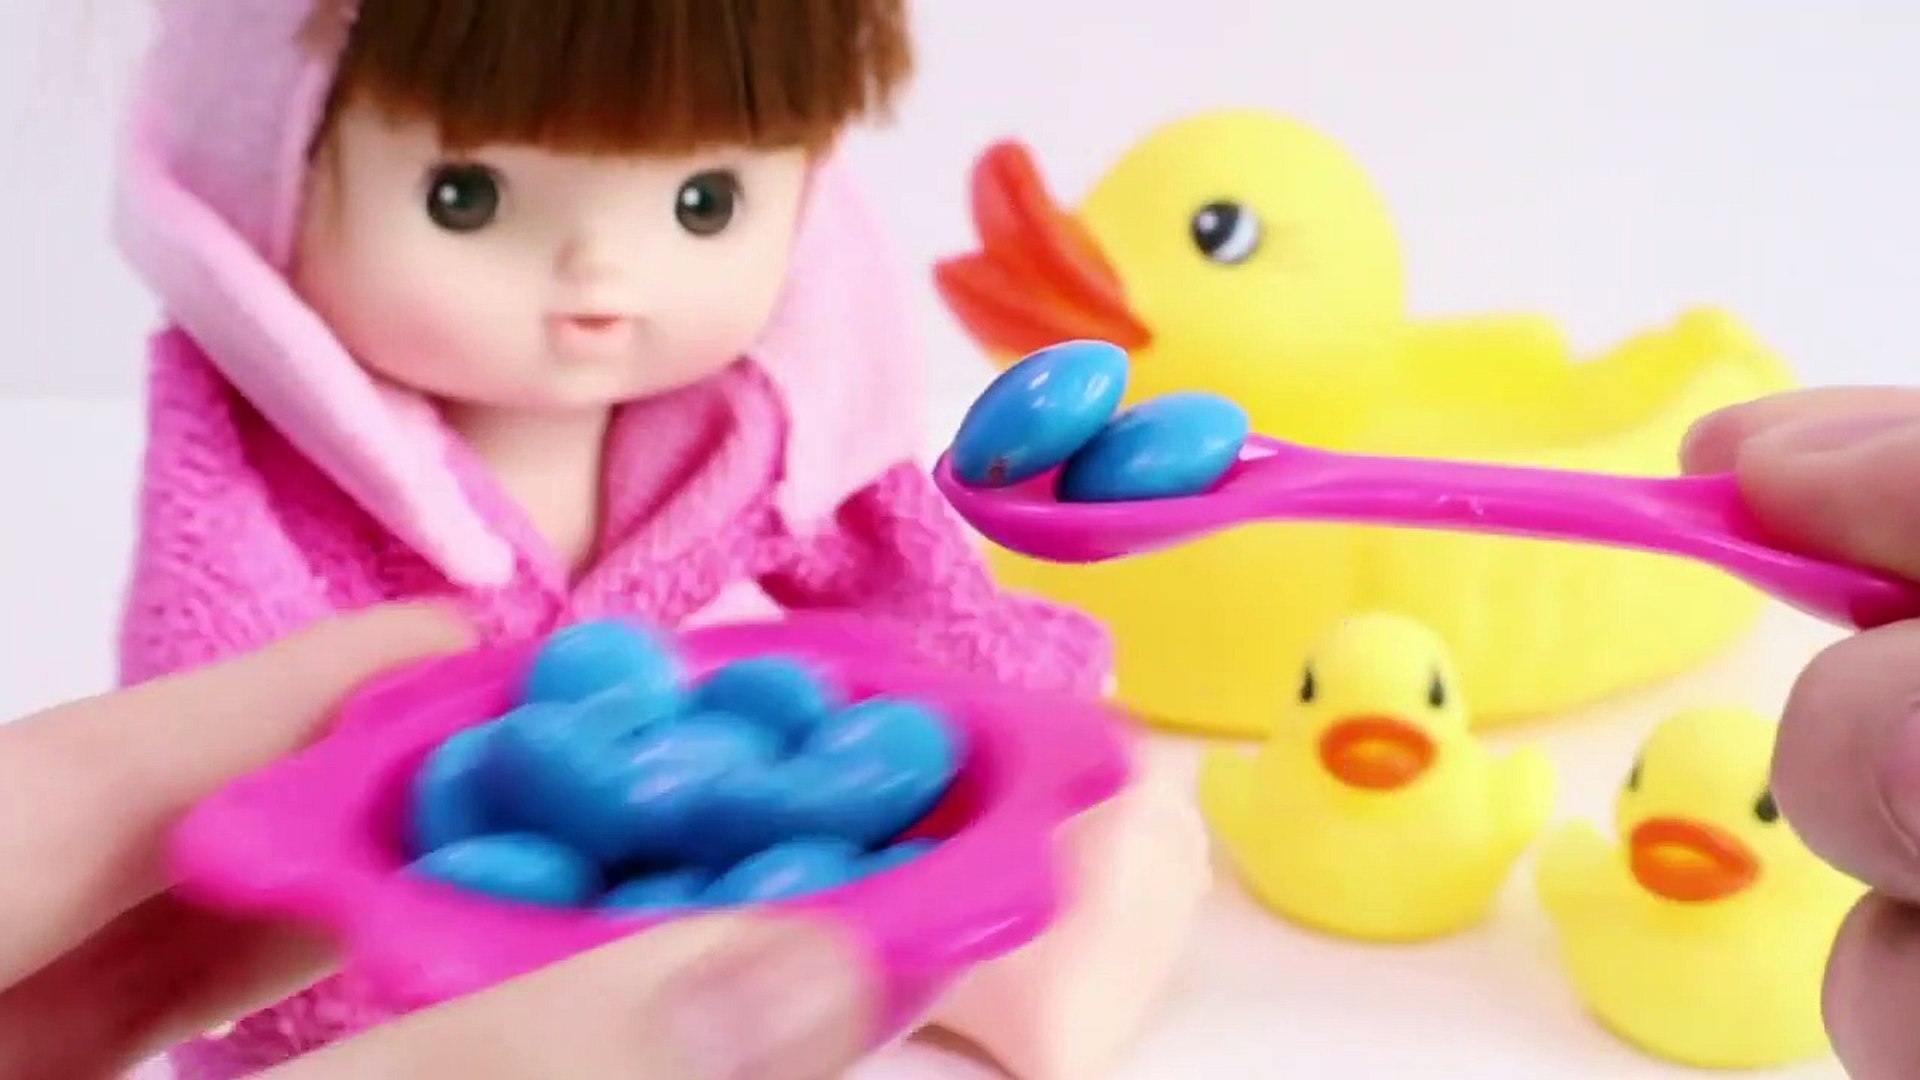 How To Make Colors Orbeez Giant Syringer Toy Learn Colors Baby Doll Bath  Time - video Dailymotion